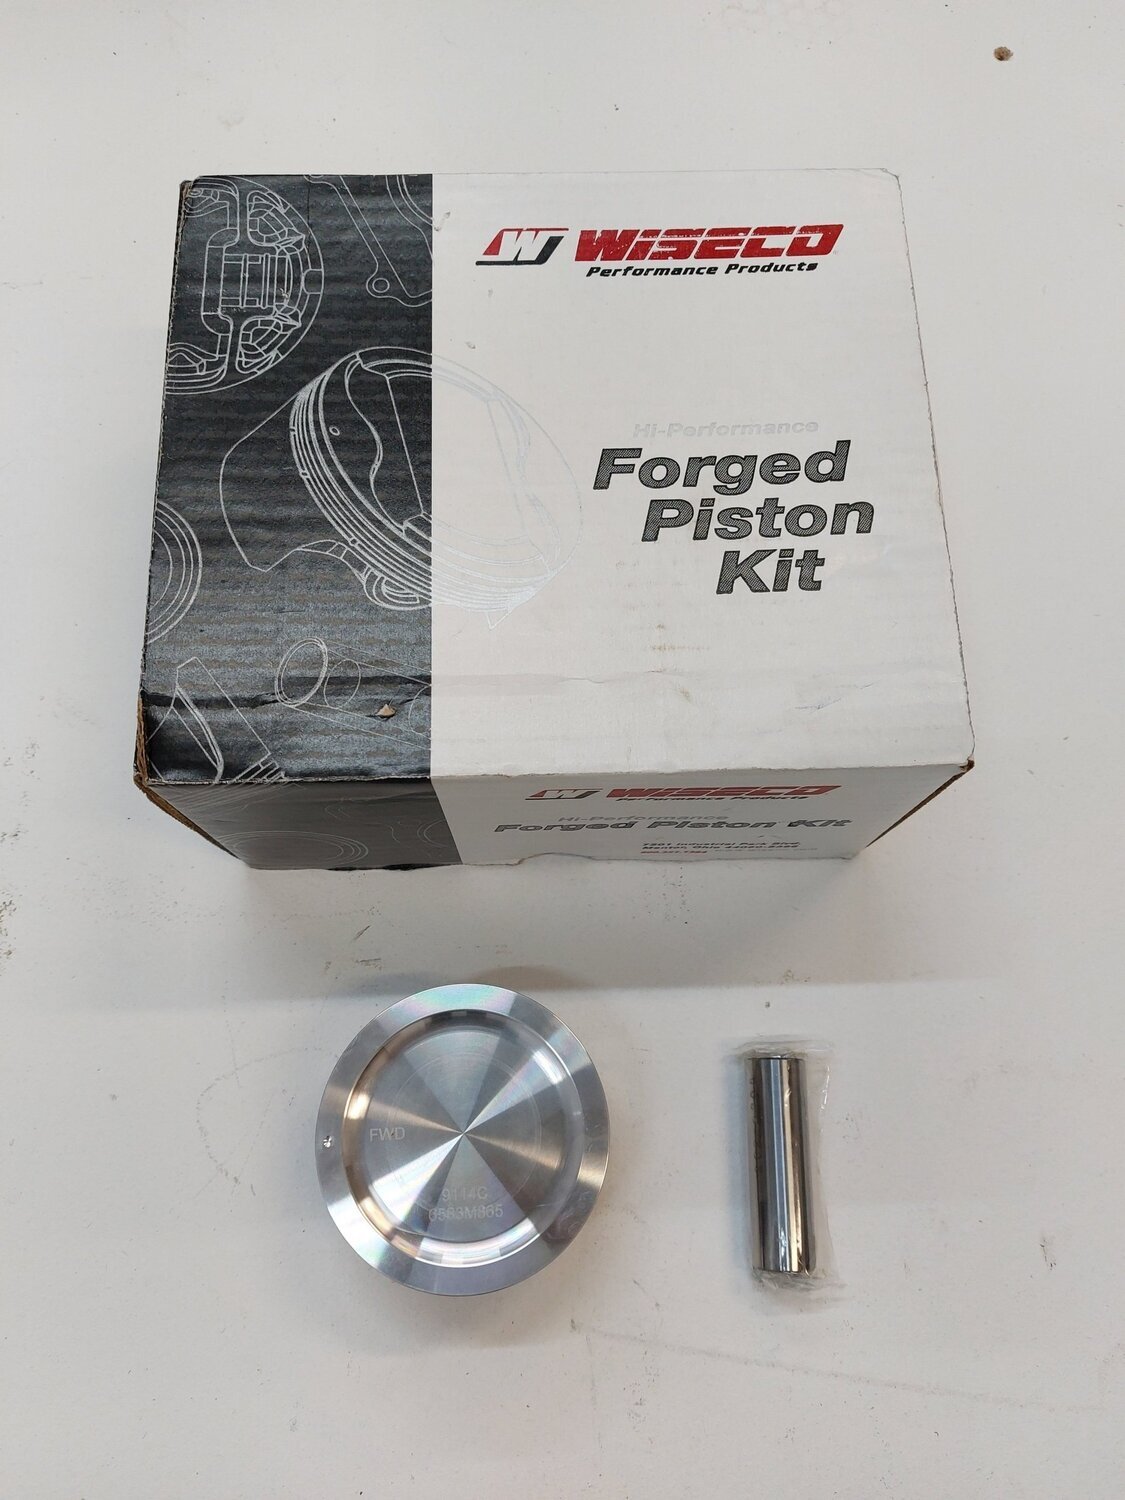 VX220 2.2 Wiseco forged pistons